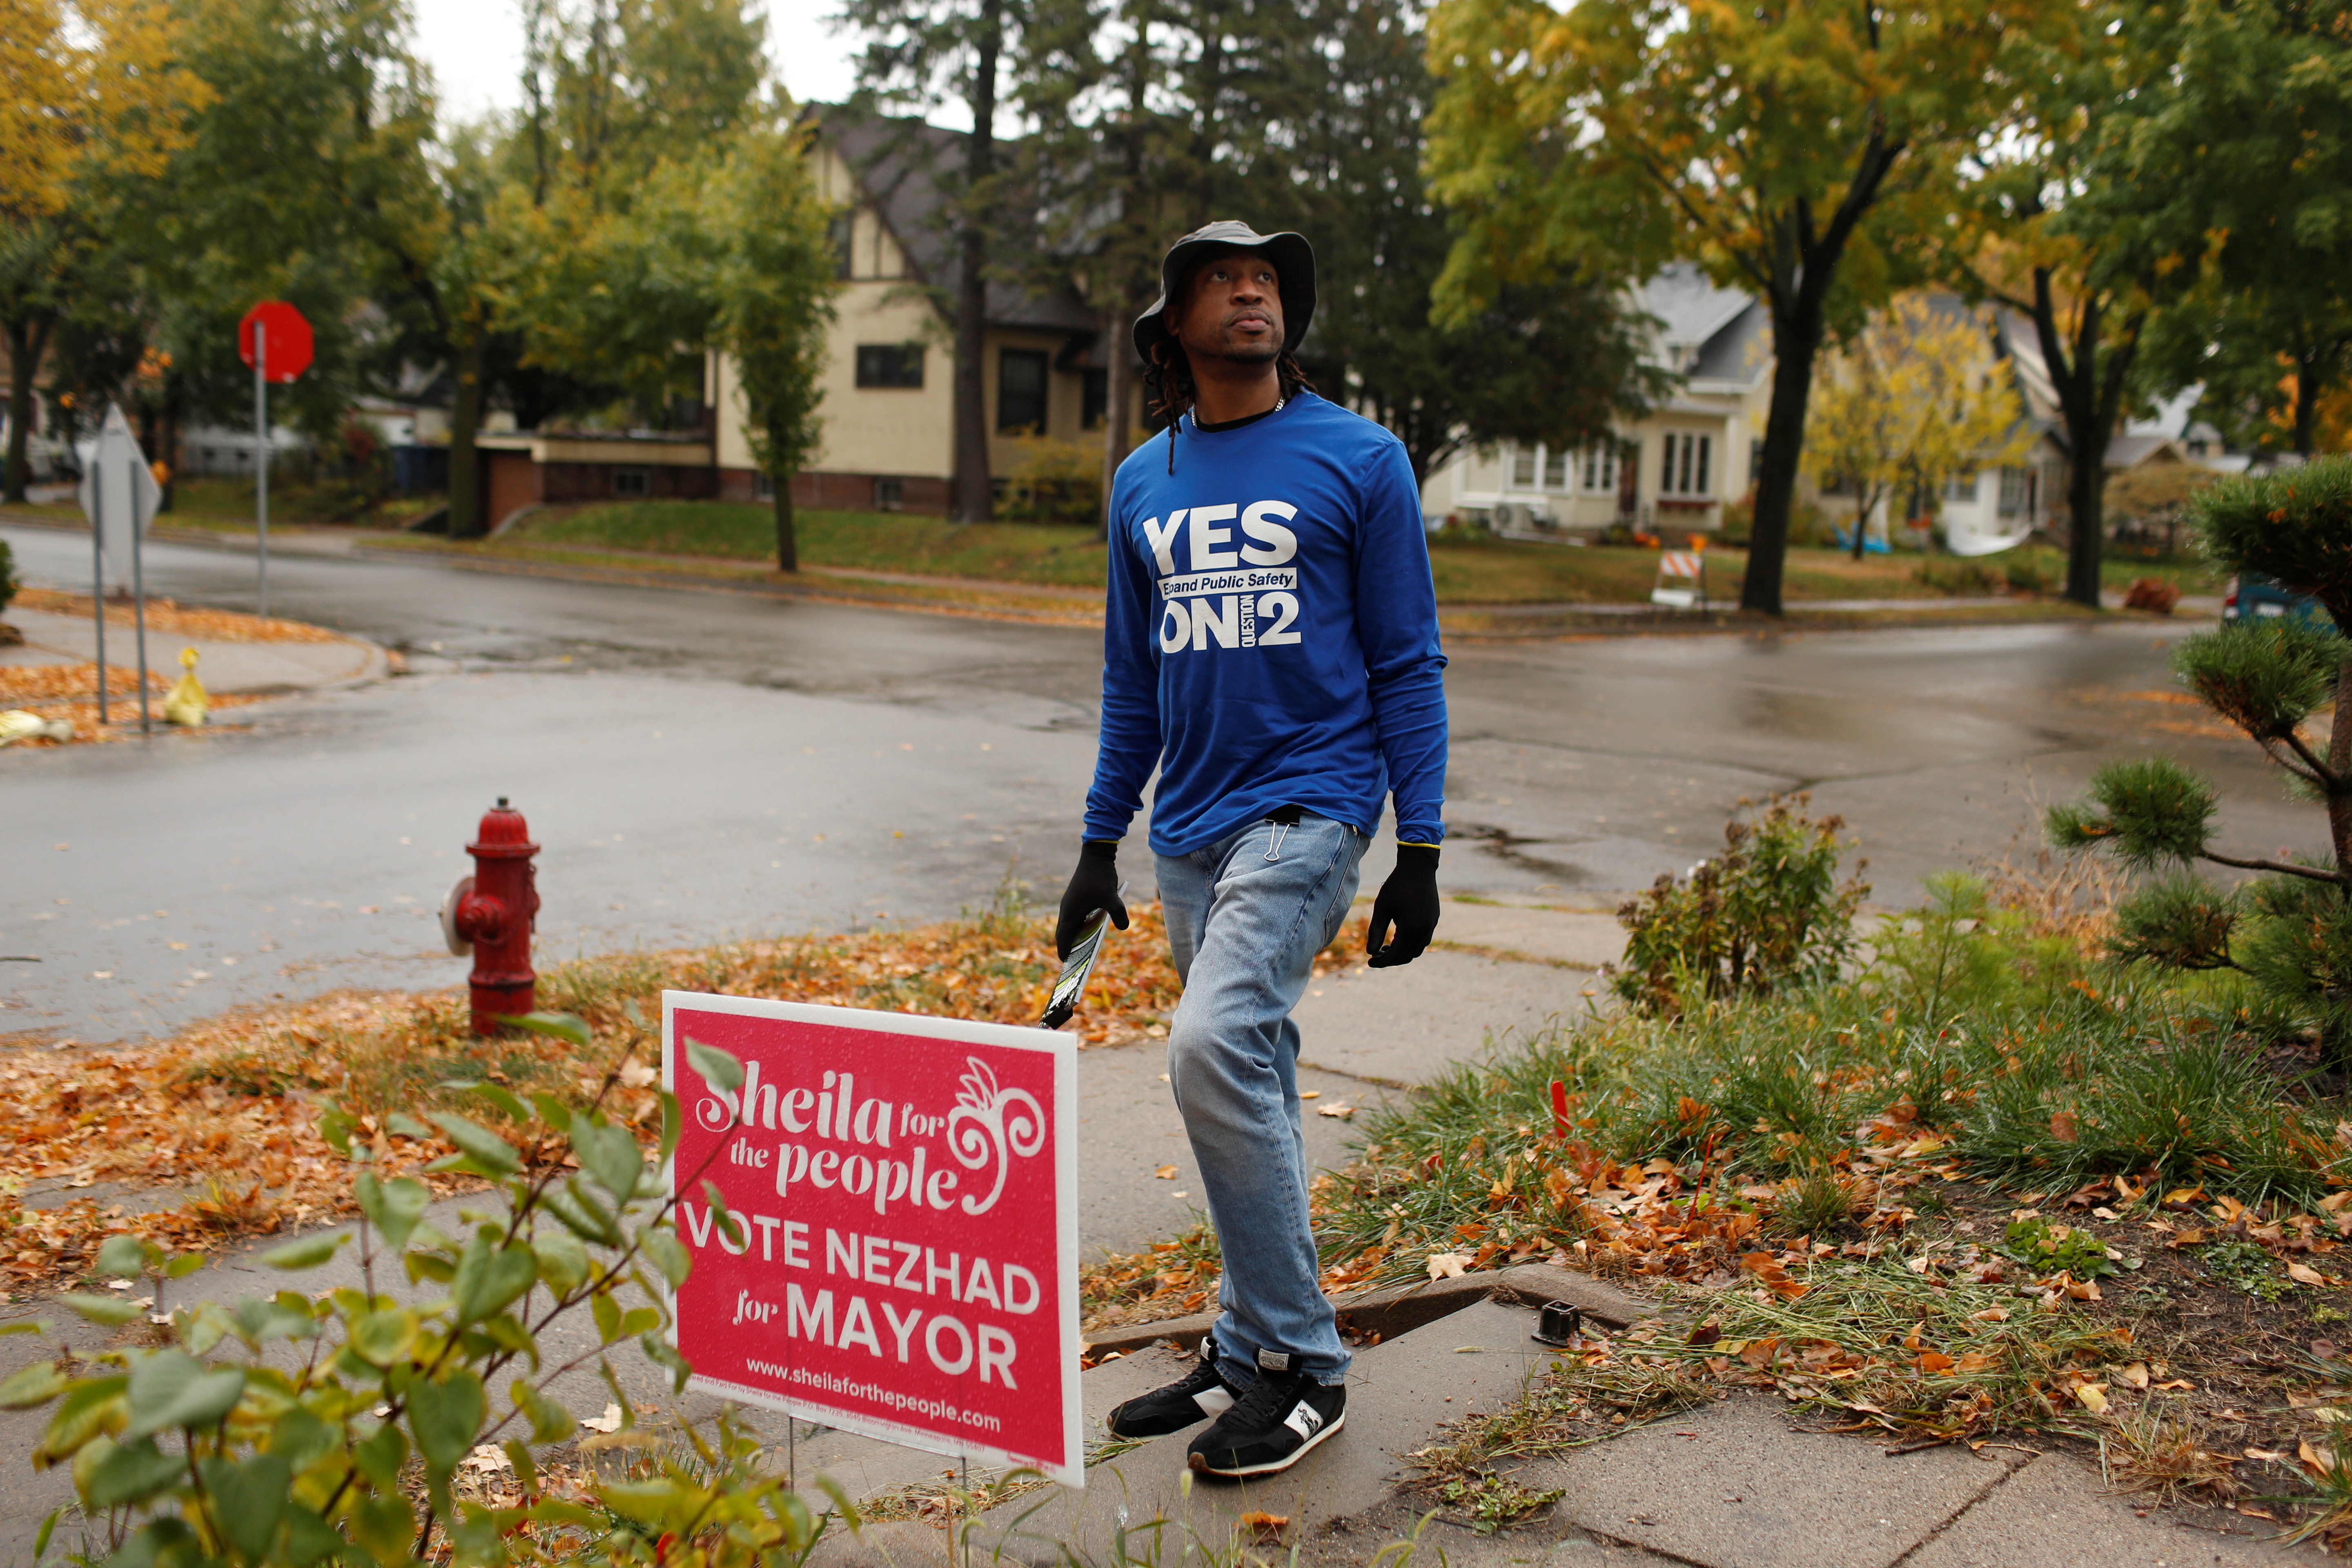 Frank McCrary III canvasses to encourage voters ahead of the November 2nd vote on the future of the police department in Minneapolis, Minnesota, U.S., October 28, 2021. Picture taken October 28, 2021.  REUTERS/Nicole Neri